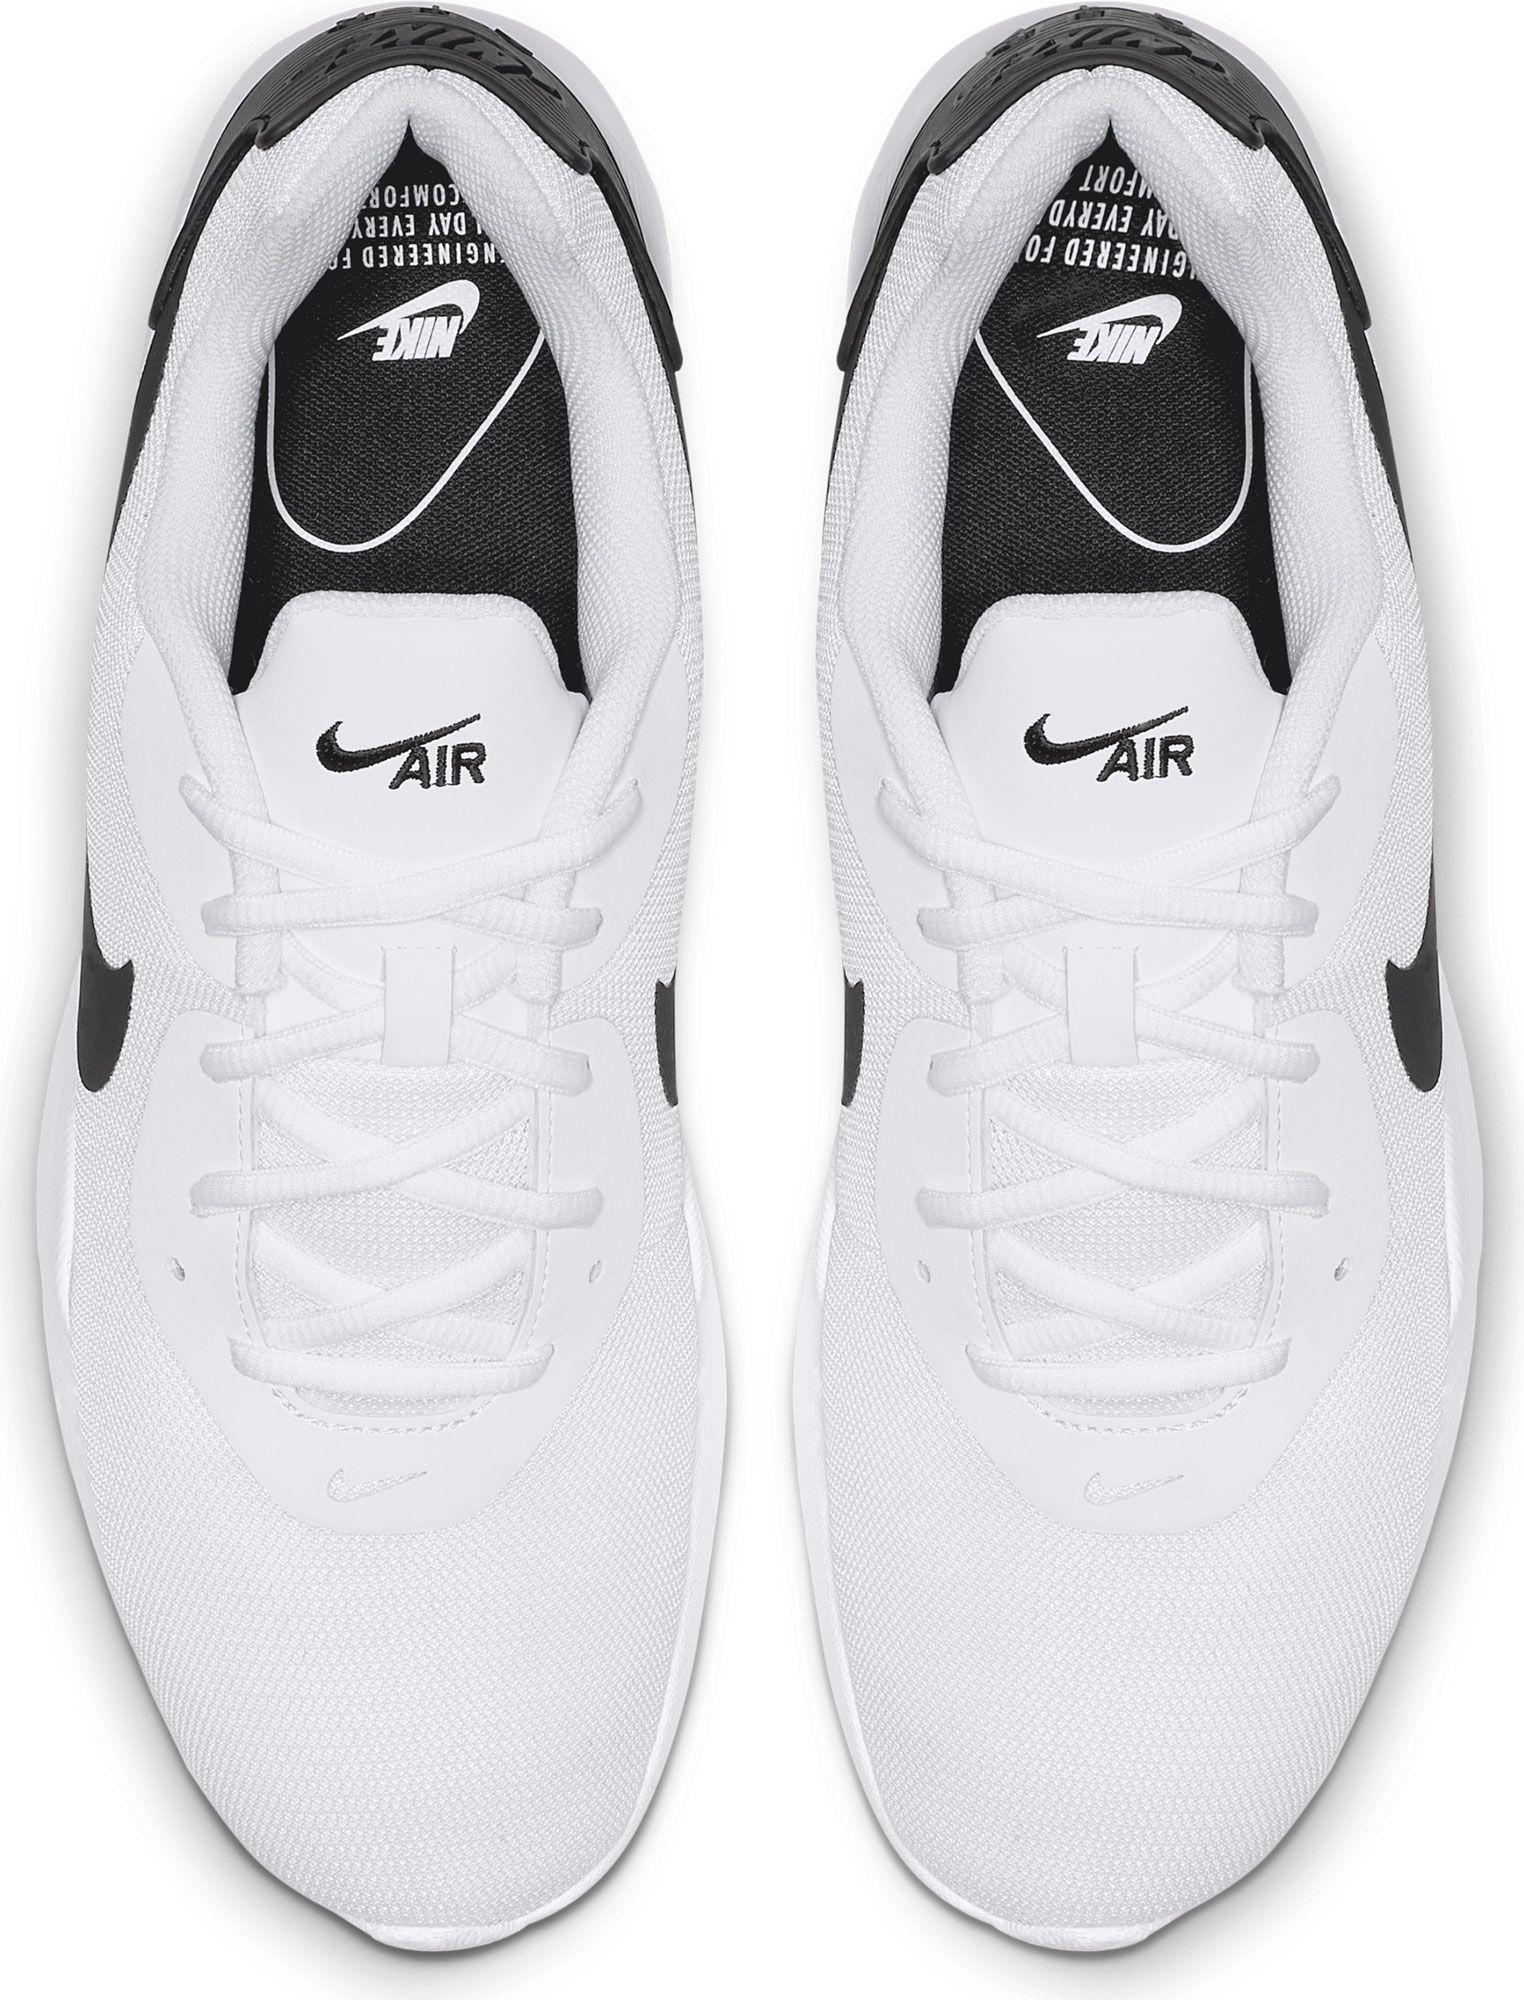 Nike Synthetic Air Max Oketo Shoes in White/Black (White) for Men - Lyst